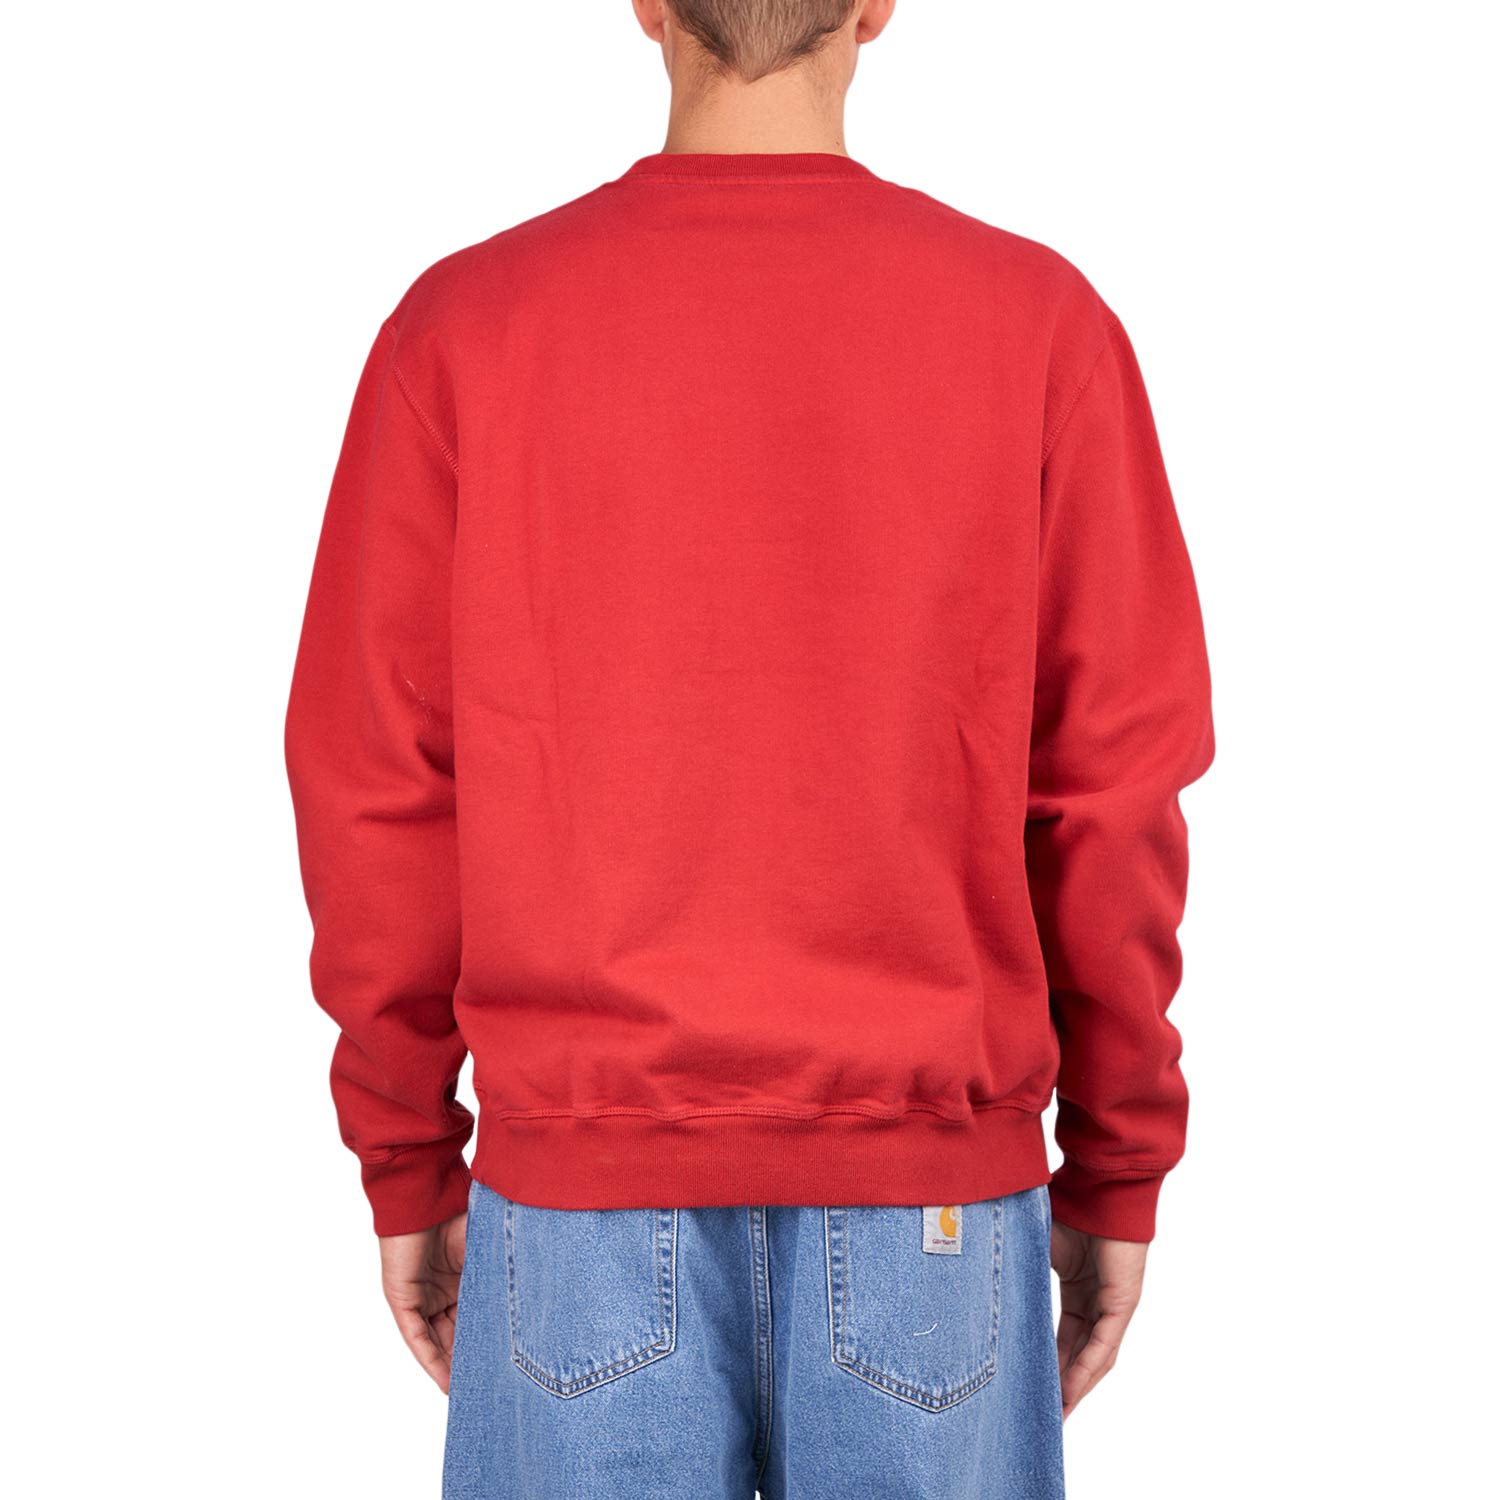 by Parra The Great Goose Crewneck Sweatshirt (Rot)  - Allike Store